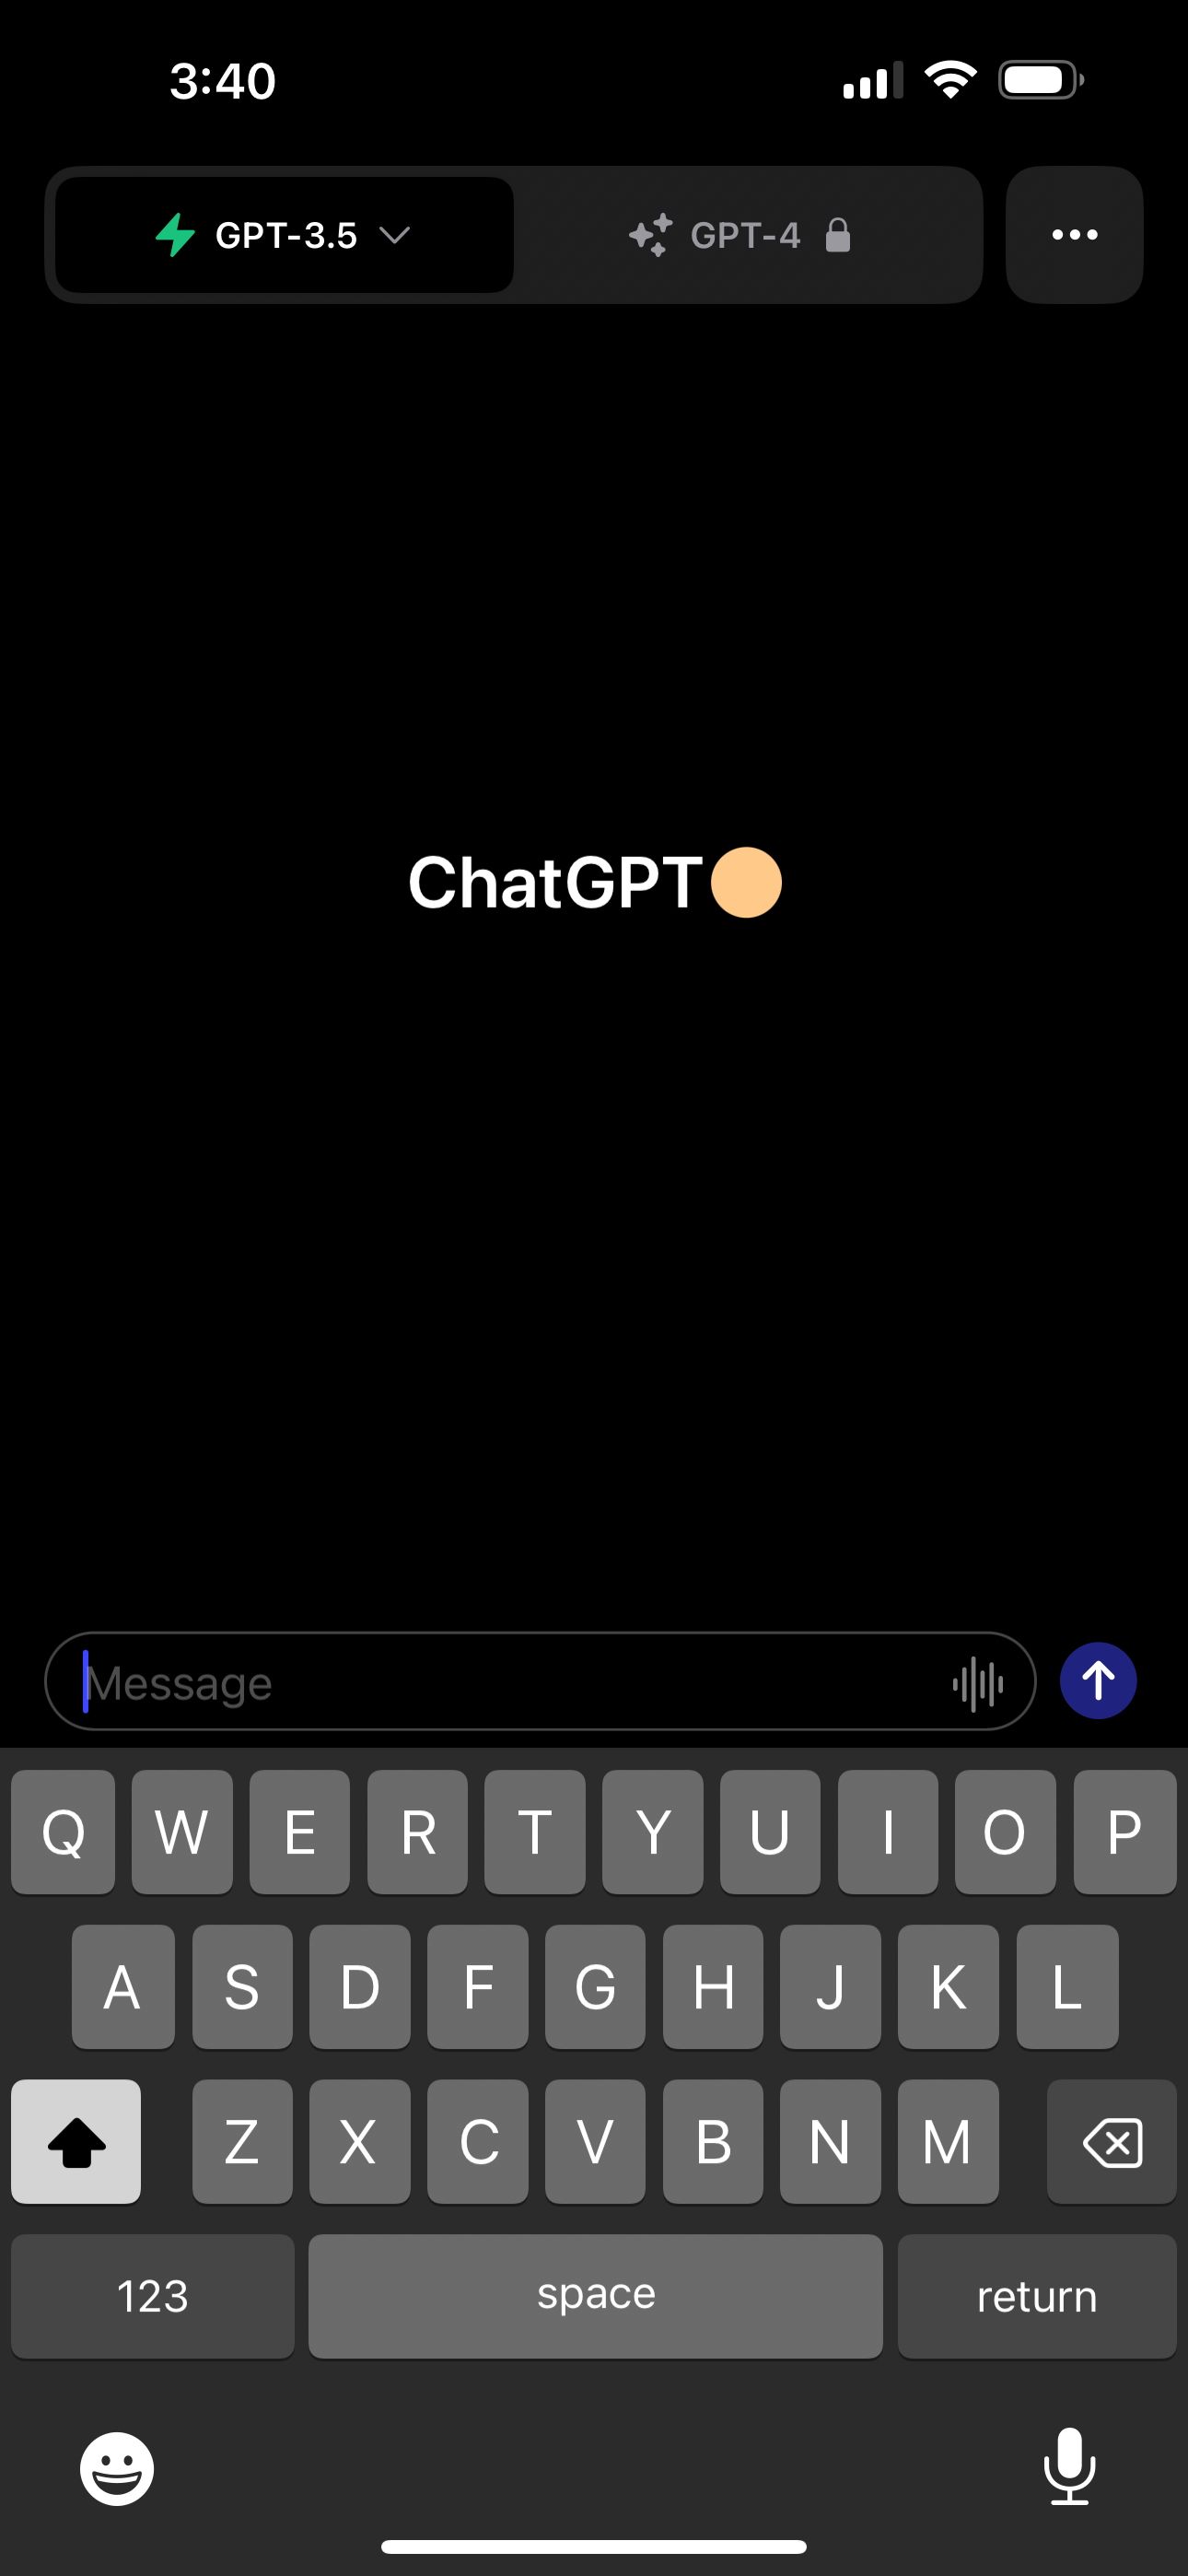 ChatGPT iOS app welcome screen